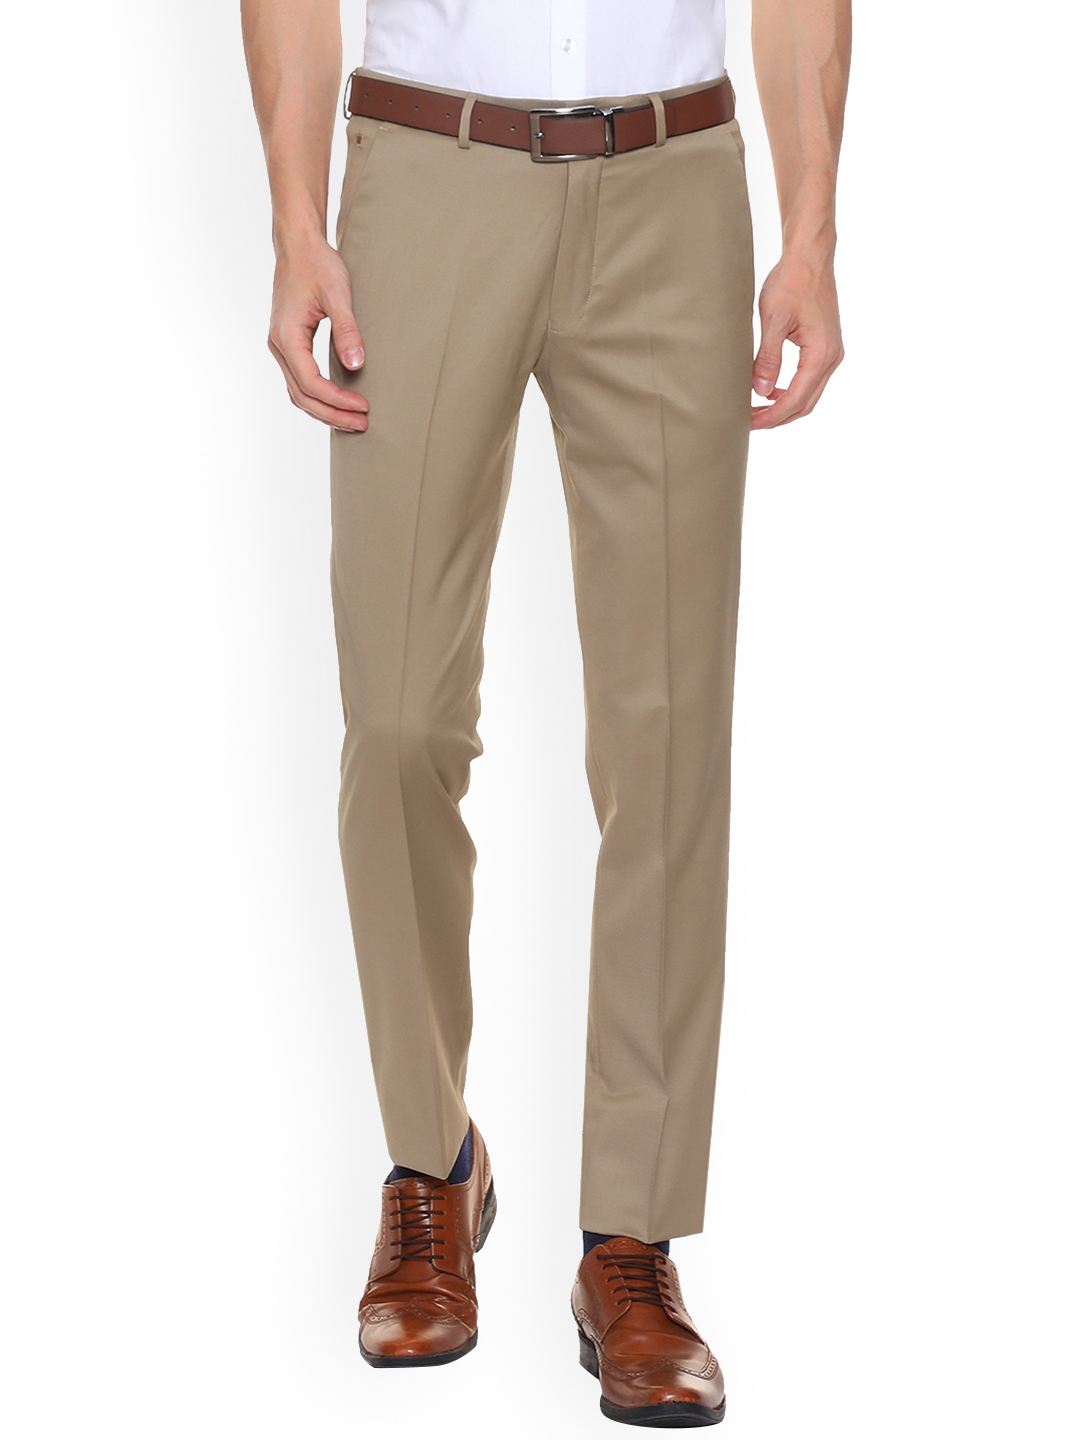 Louis Philippe Mens Relaxed Fit Formal Trousers LPTPMRGBZ73818Beige38   Amazonin Fashion